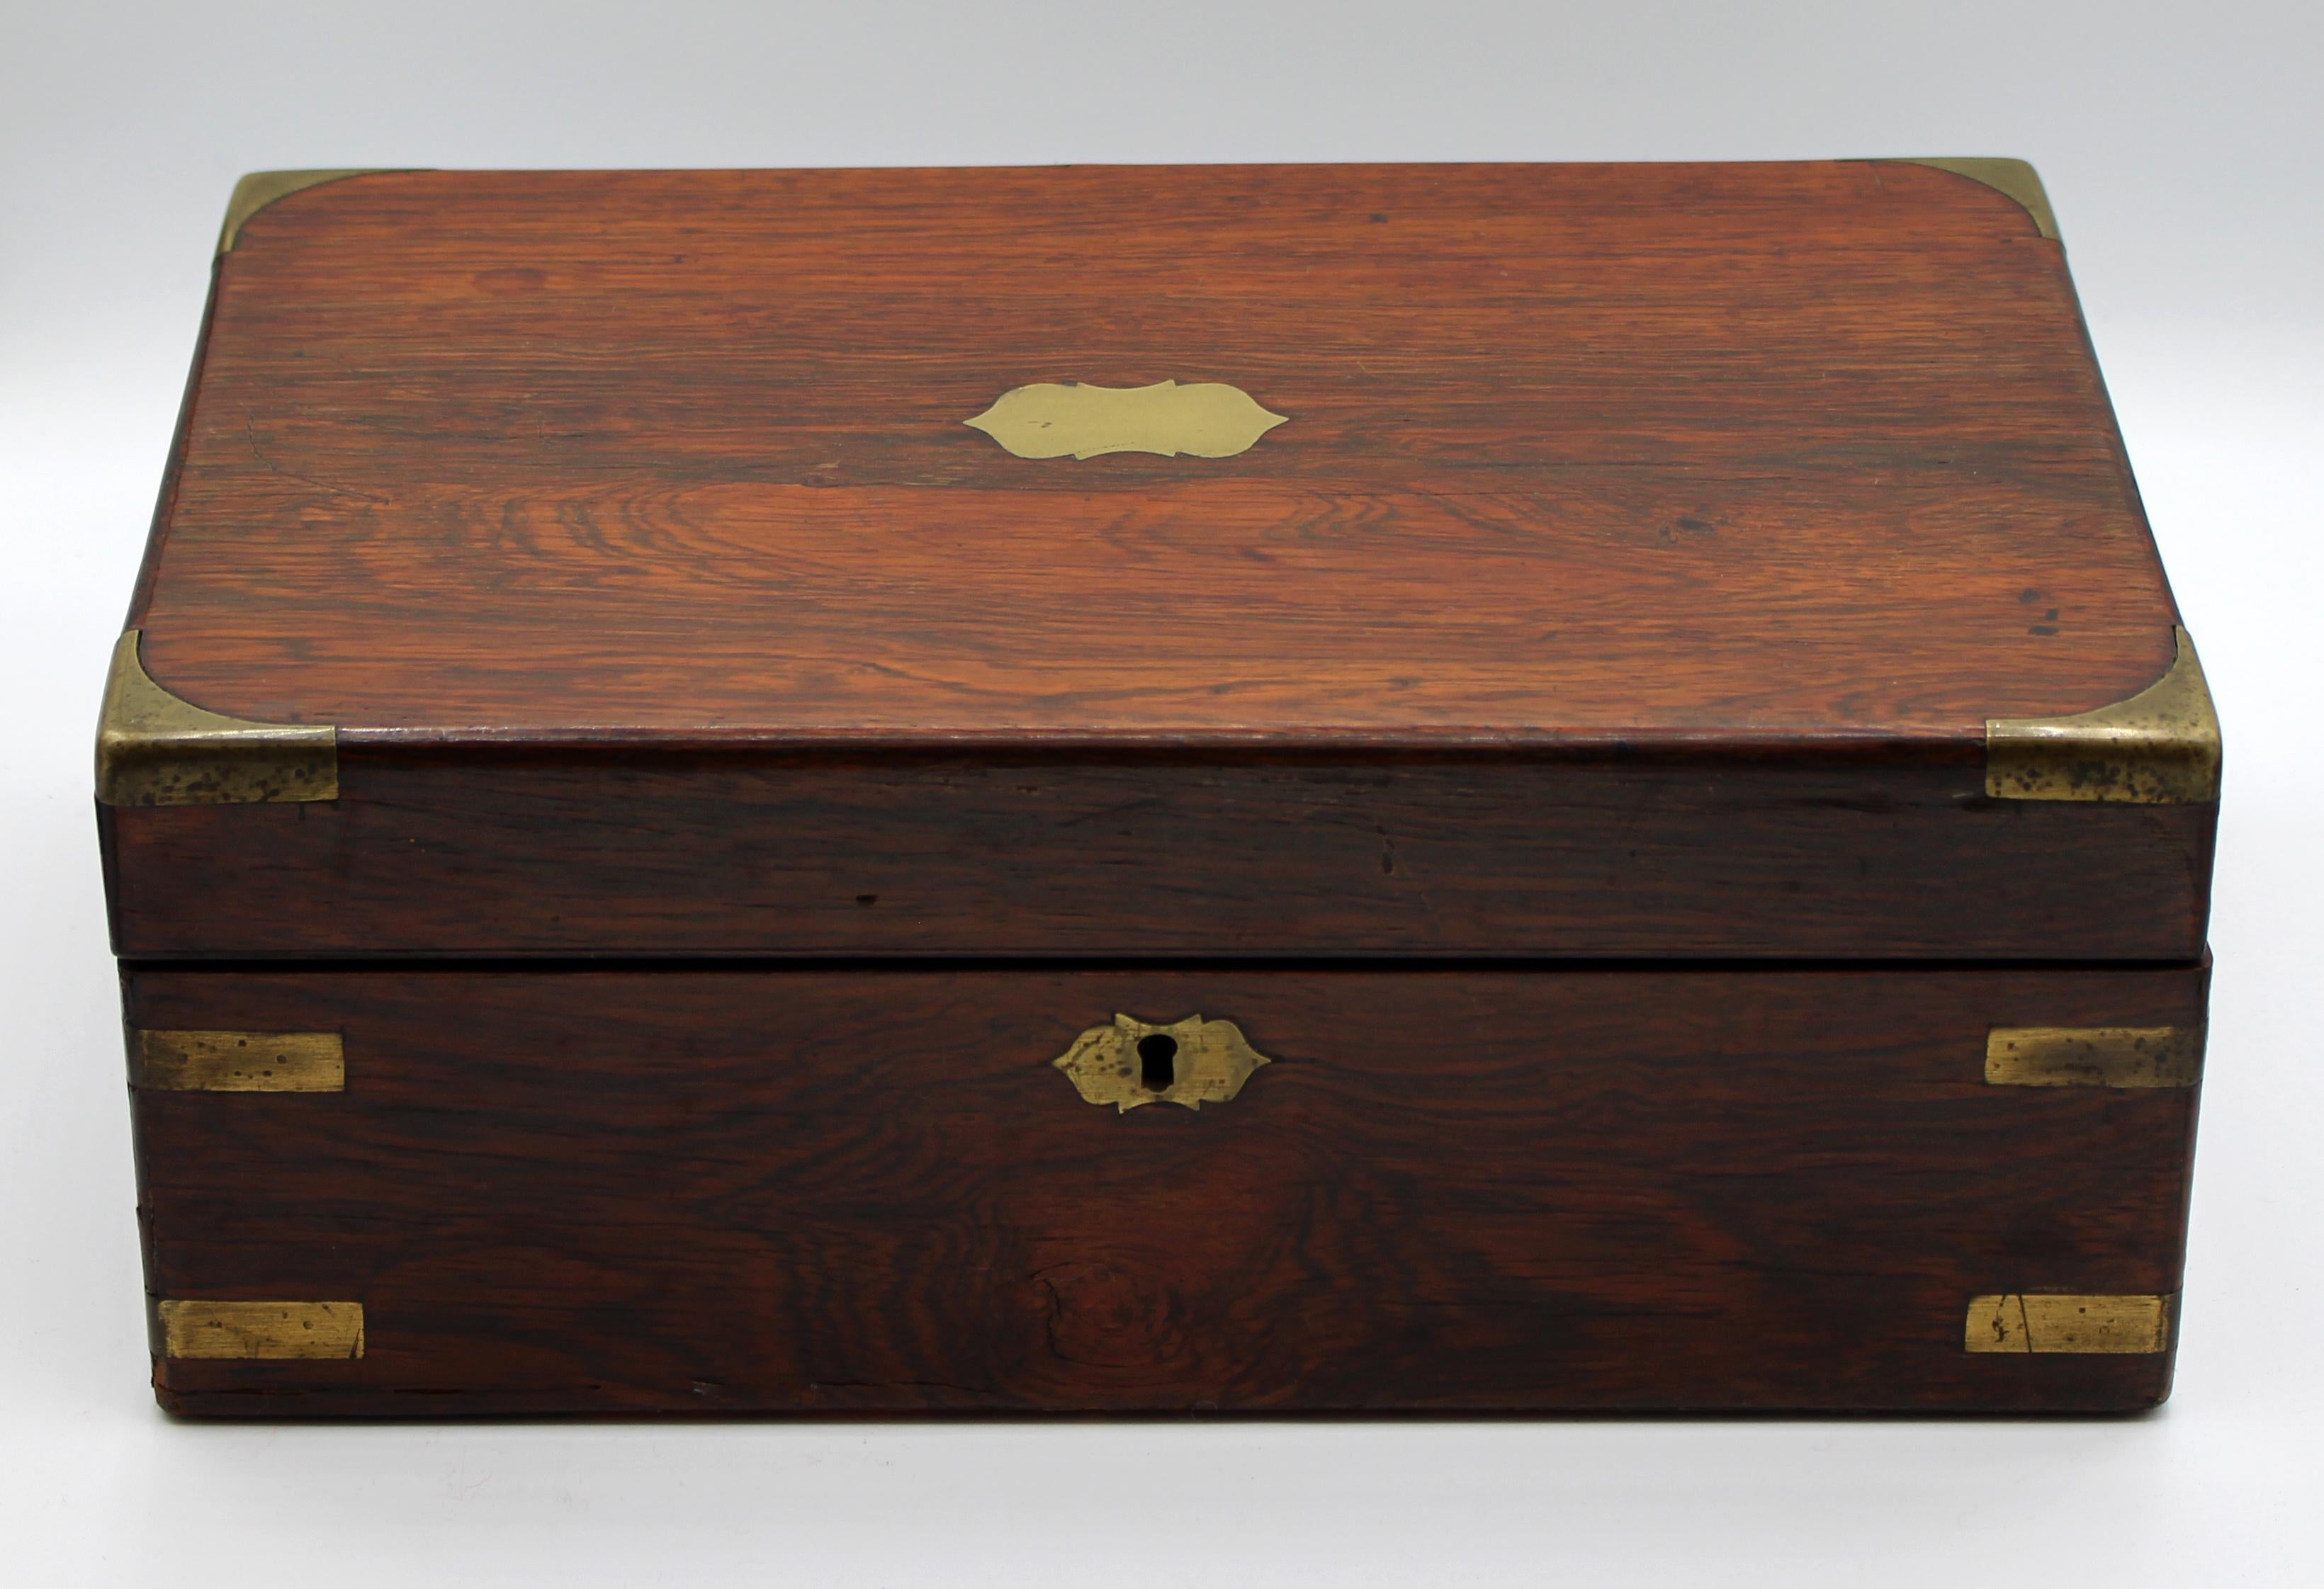 English rosewood lap desk, c.1840-60. Small size. Well mounted in protective brass with brass escutcheons. Fitted interior with two secret drawers. Replaced writing surface. Some veneer losses commensurate with age and use. 13 3/4